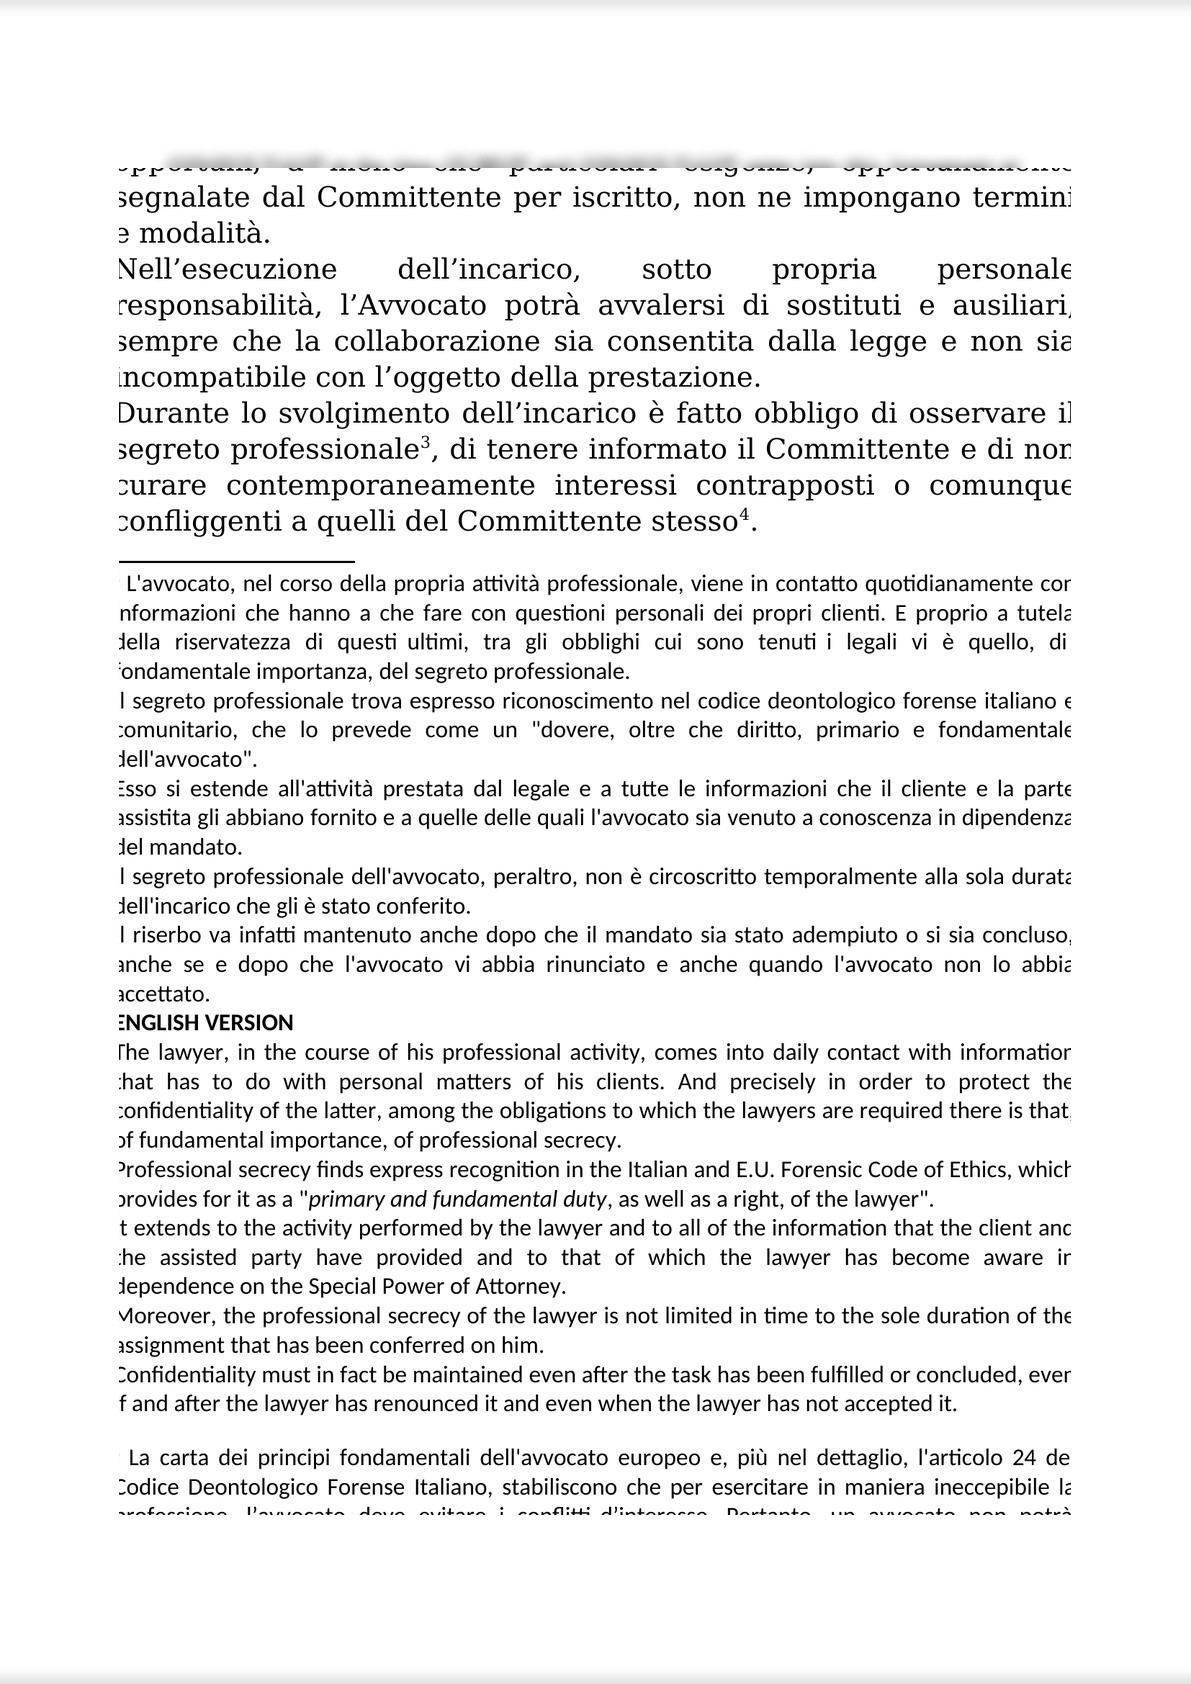 INTELLECTUAL WORK AGREEMENT FOR OUT-OF-COURT ACTIVITIES AND ATTACHMENTS 1 (PRIVACY); 2 (ANTI-MONEY LAUNDERING); AND 3 FEE QUOTE / CONTRATTO D’OPERA INTELLETTUALE STRAGIUDIZIALE-3